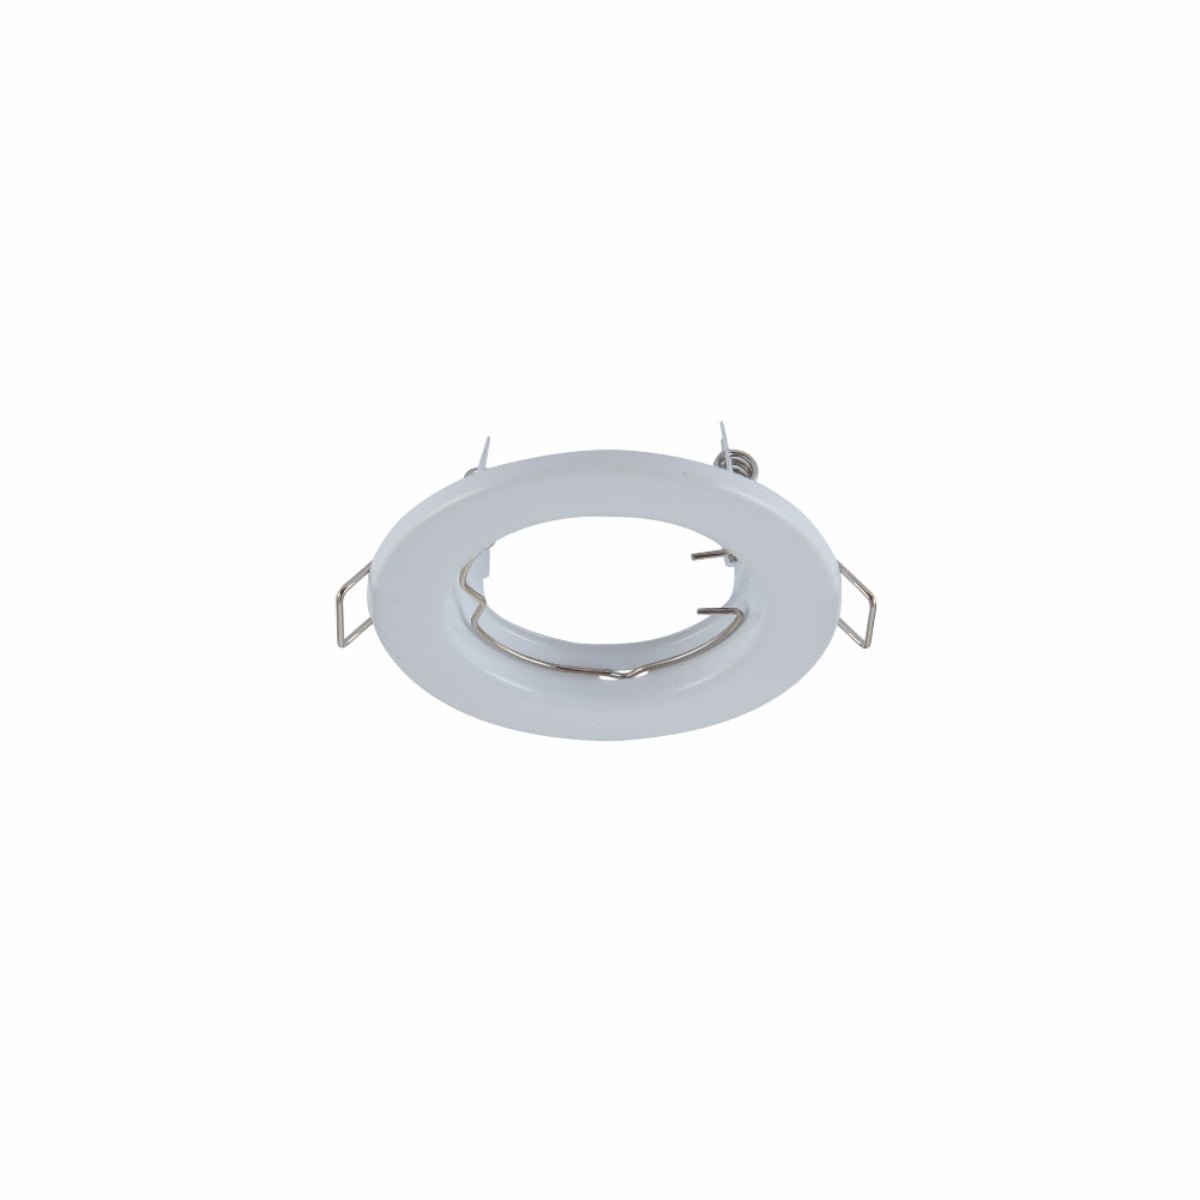 Main image of Fixed Pressed Steel Downlight White IP20 with GU10 Fitting | TEKLED 143-03736